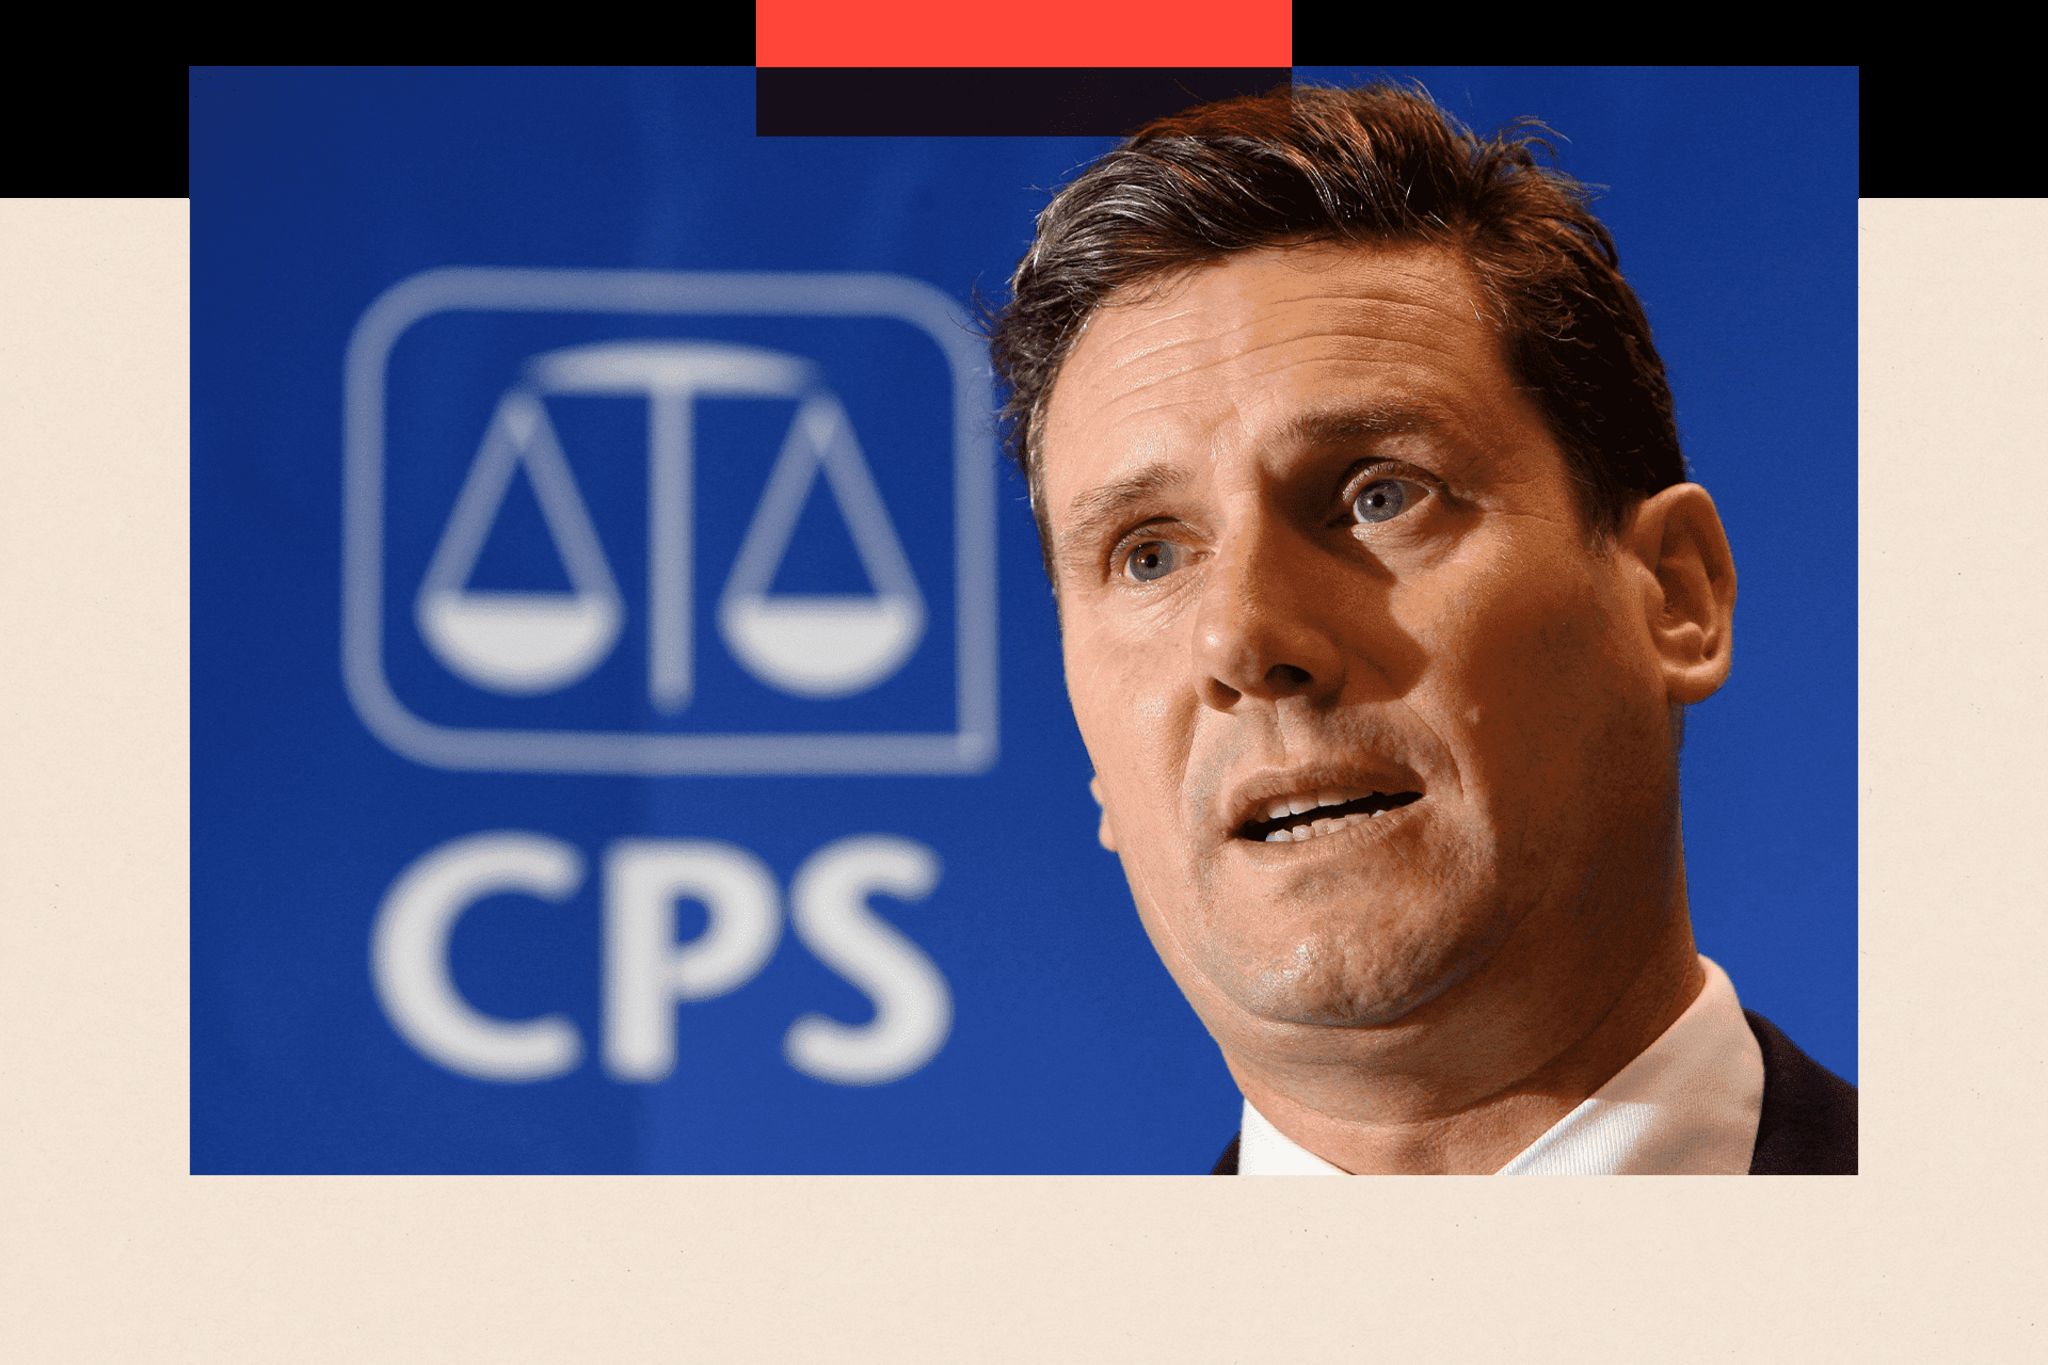 Keir Starmer during his time at the Crown Prosecution Service